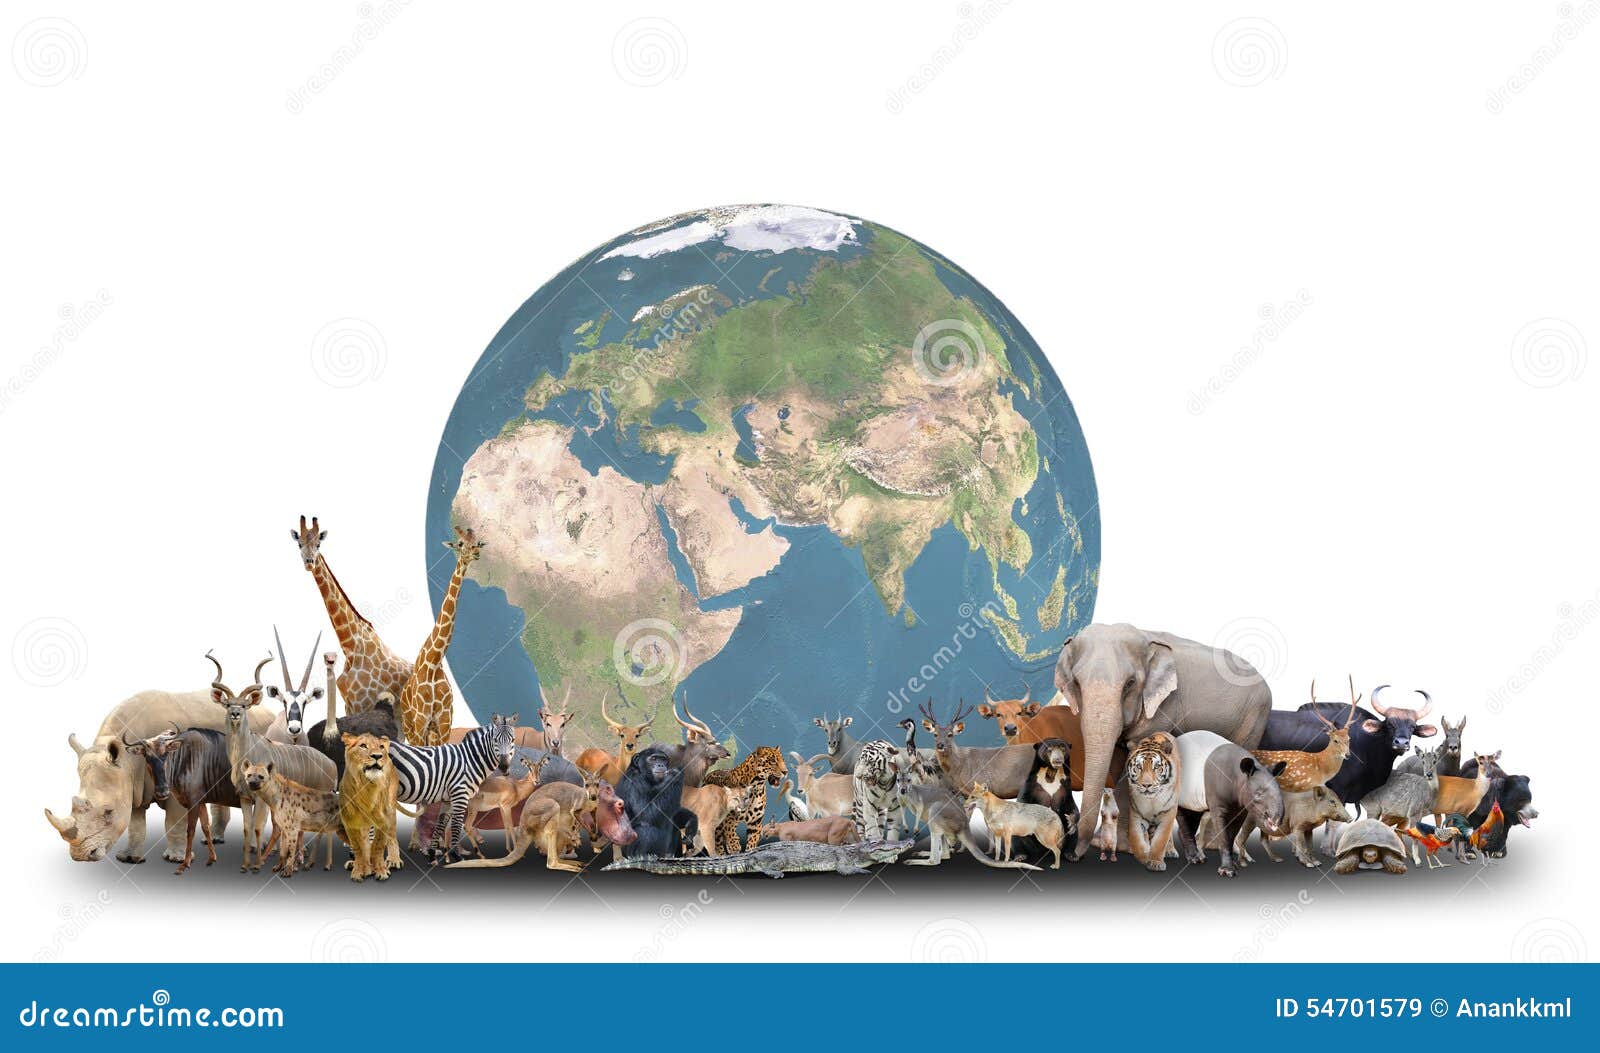 animal of the world with planet earth